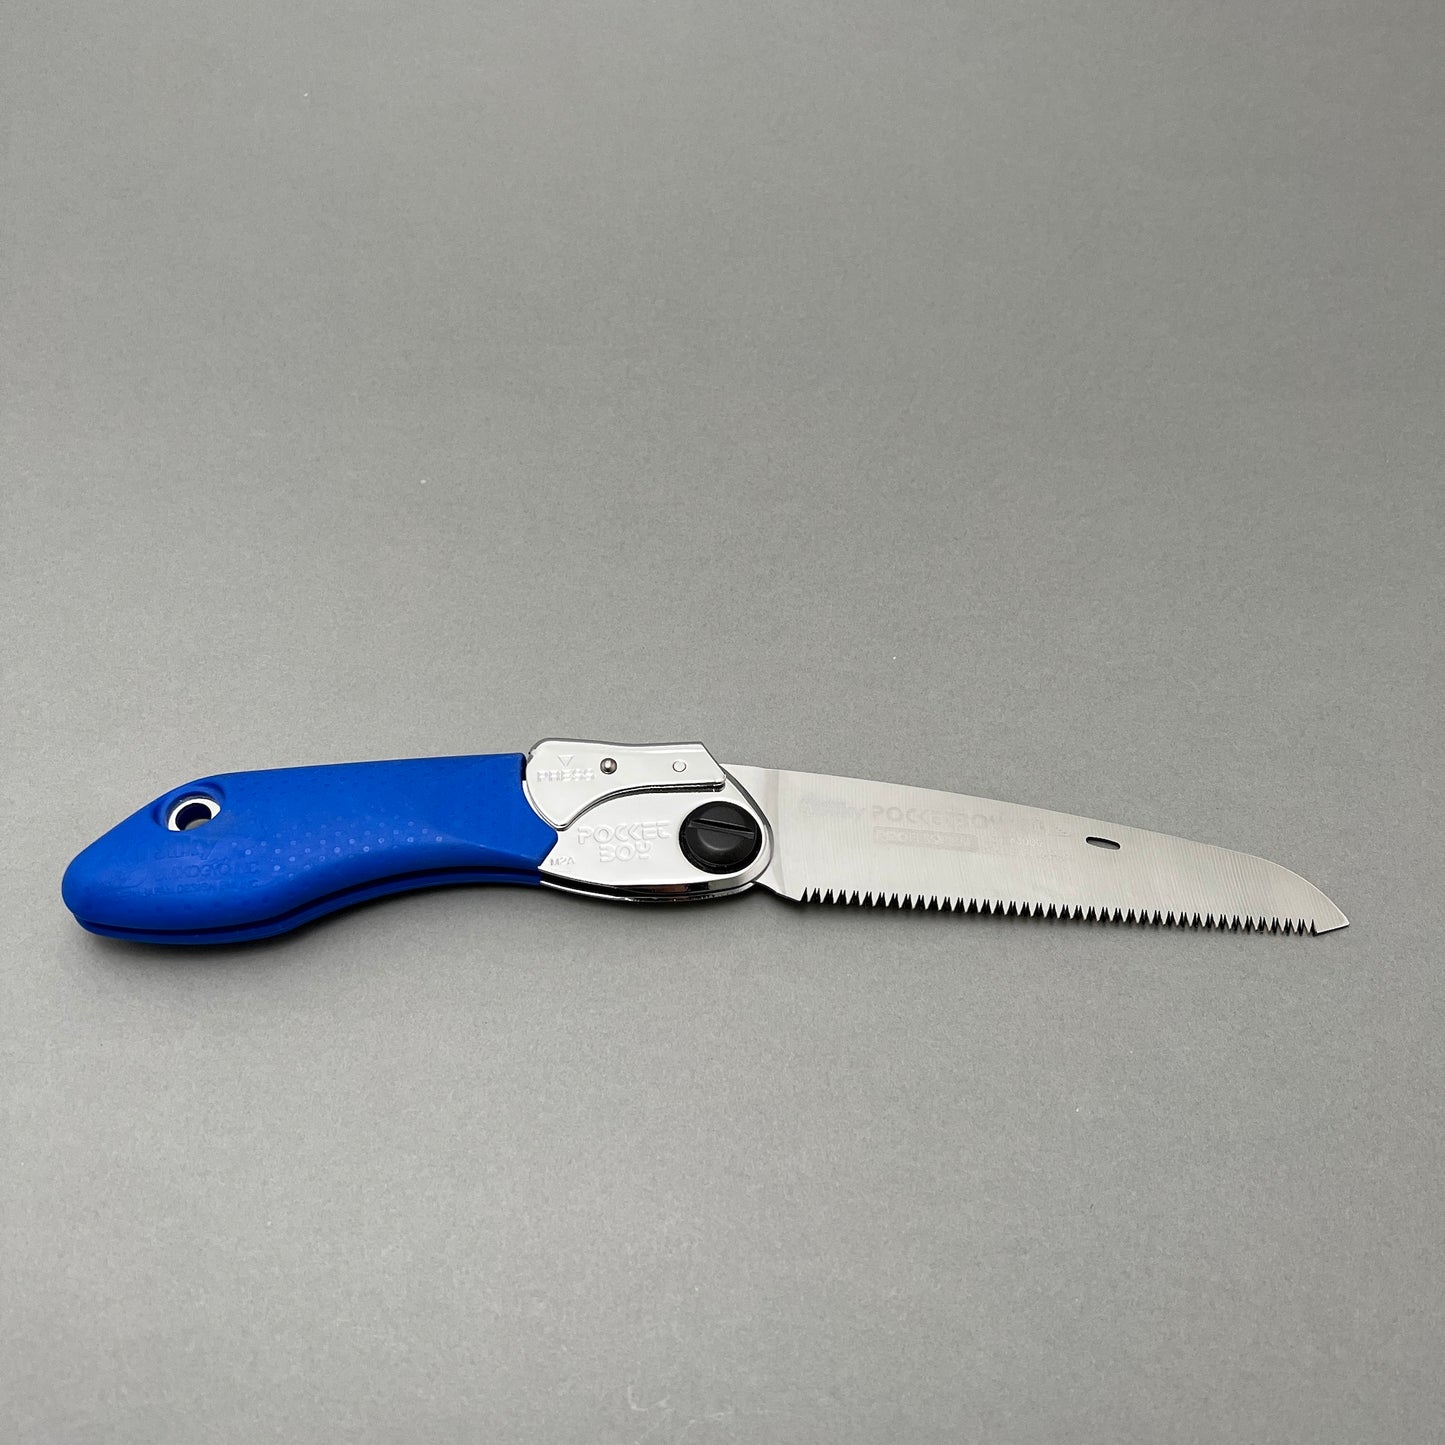 A foldable hand saw laying on a gray background  Edit alt text